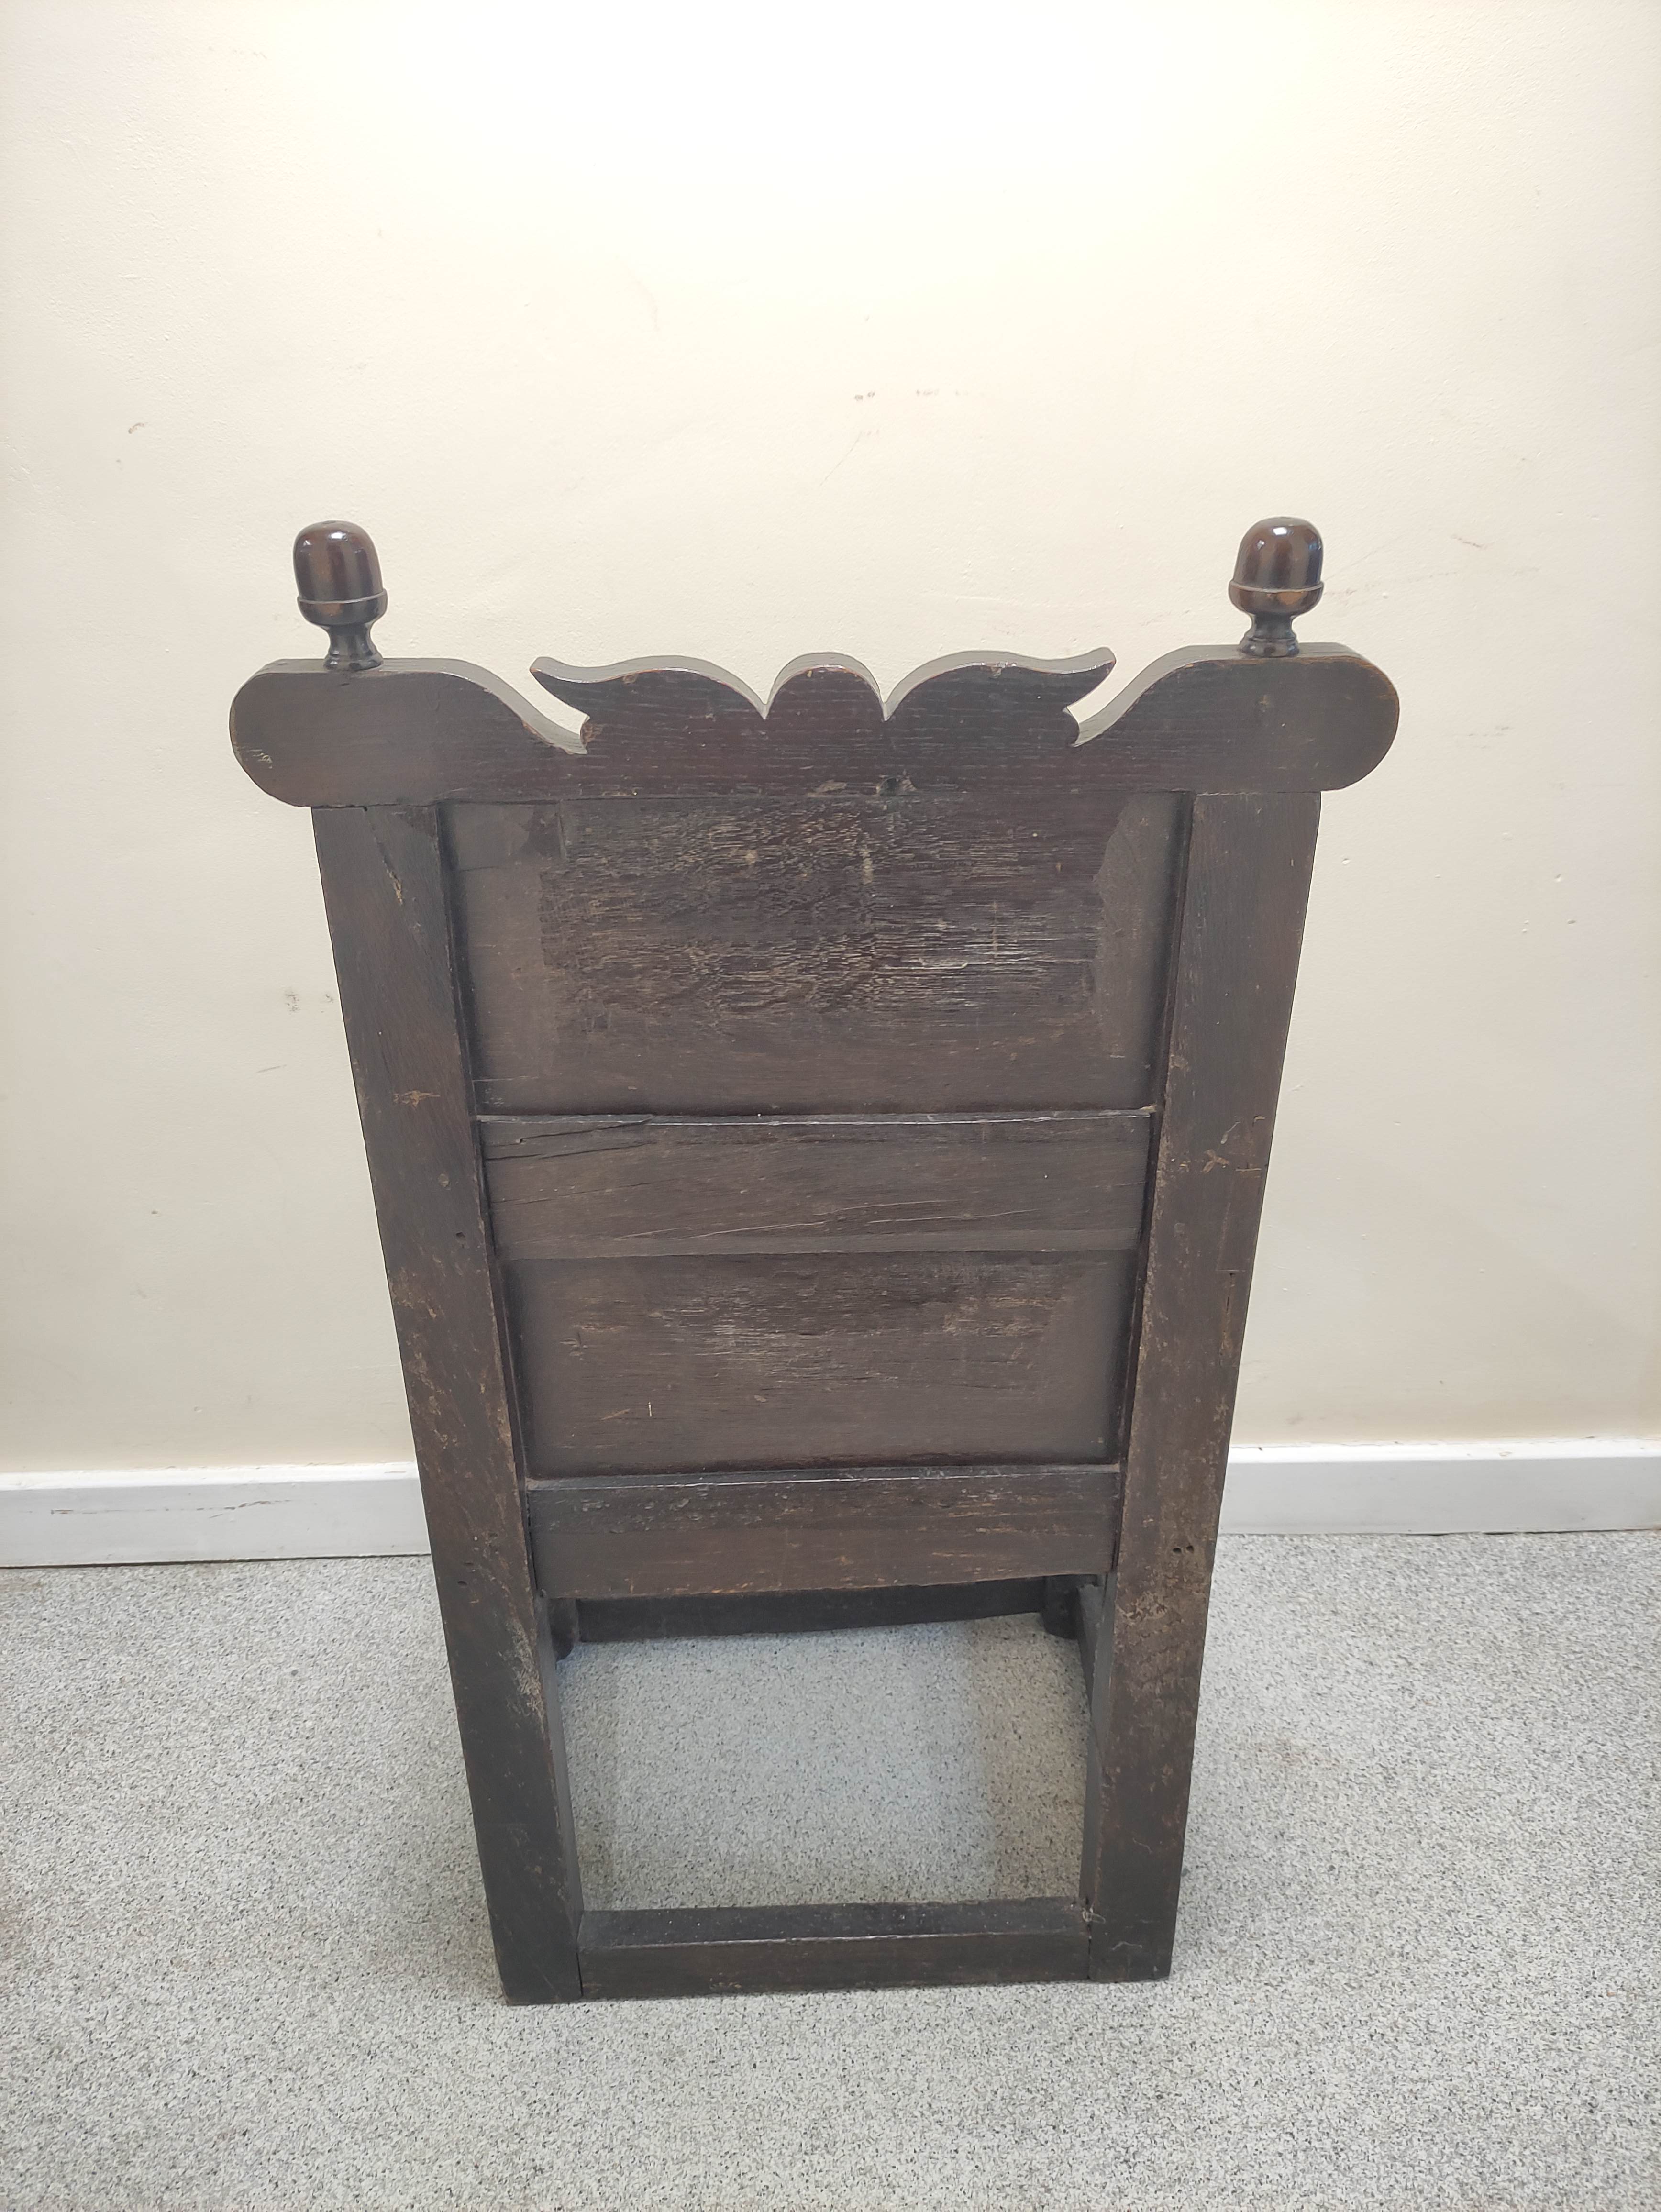 17th century wainscot chair, the foliate carved panel back with acorn finials, above solid seat, - Image 6 of 6